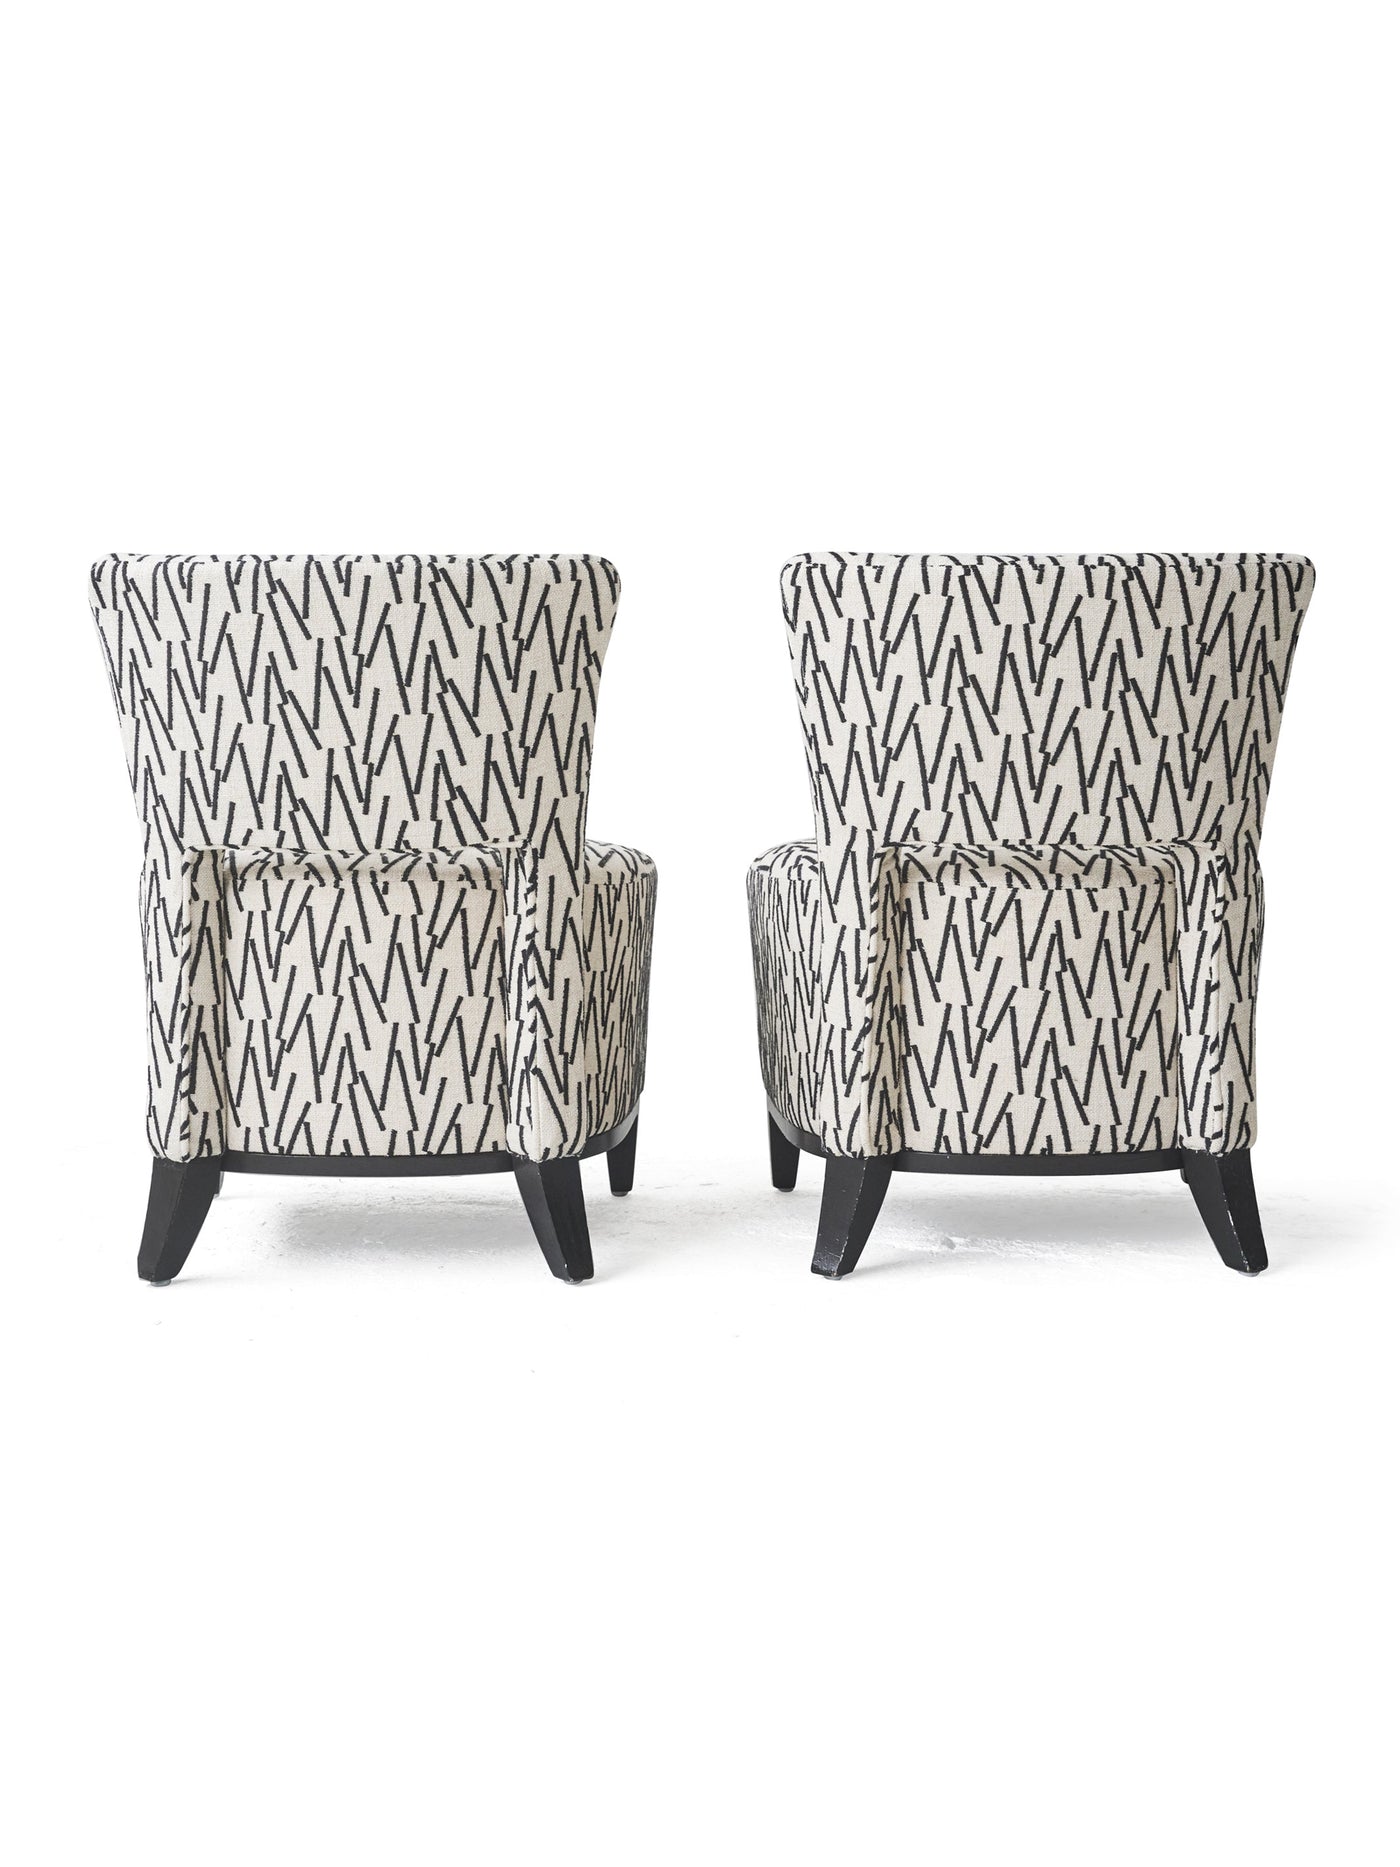 Pair of Low Chairs in Black & White from The Upper House in Larsen Fabric